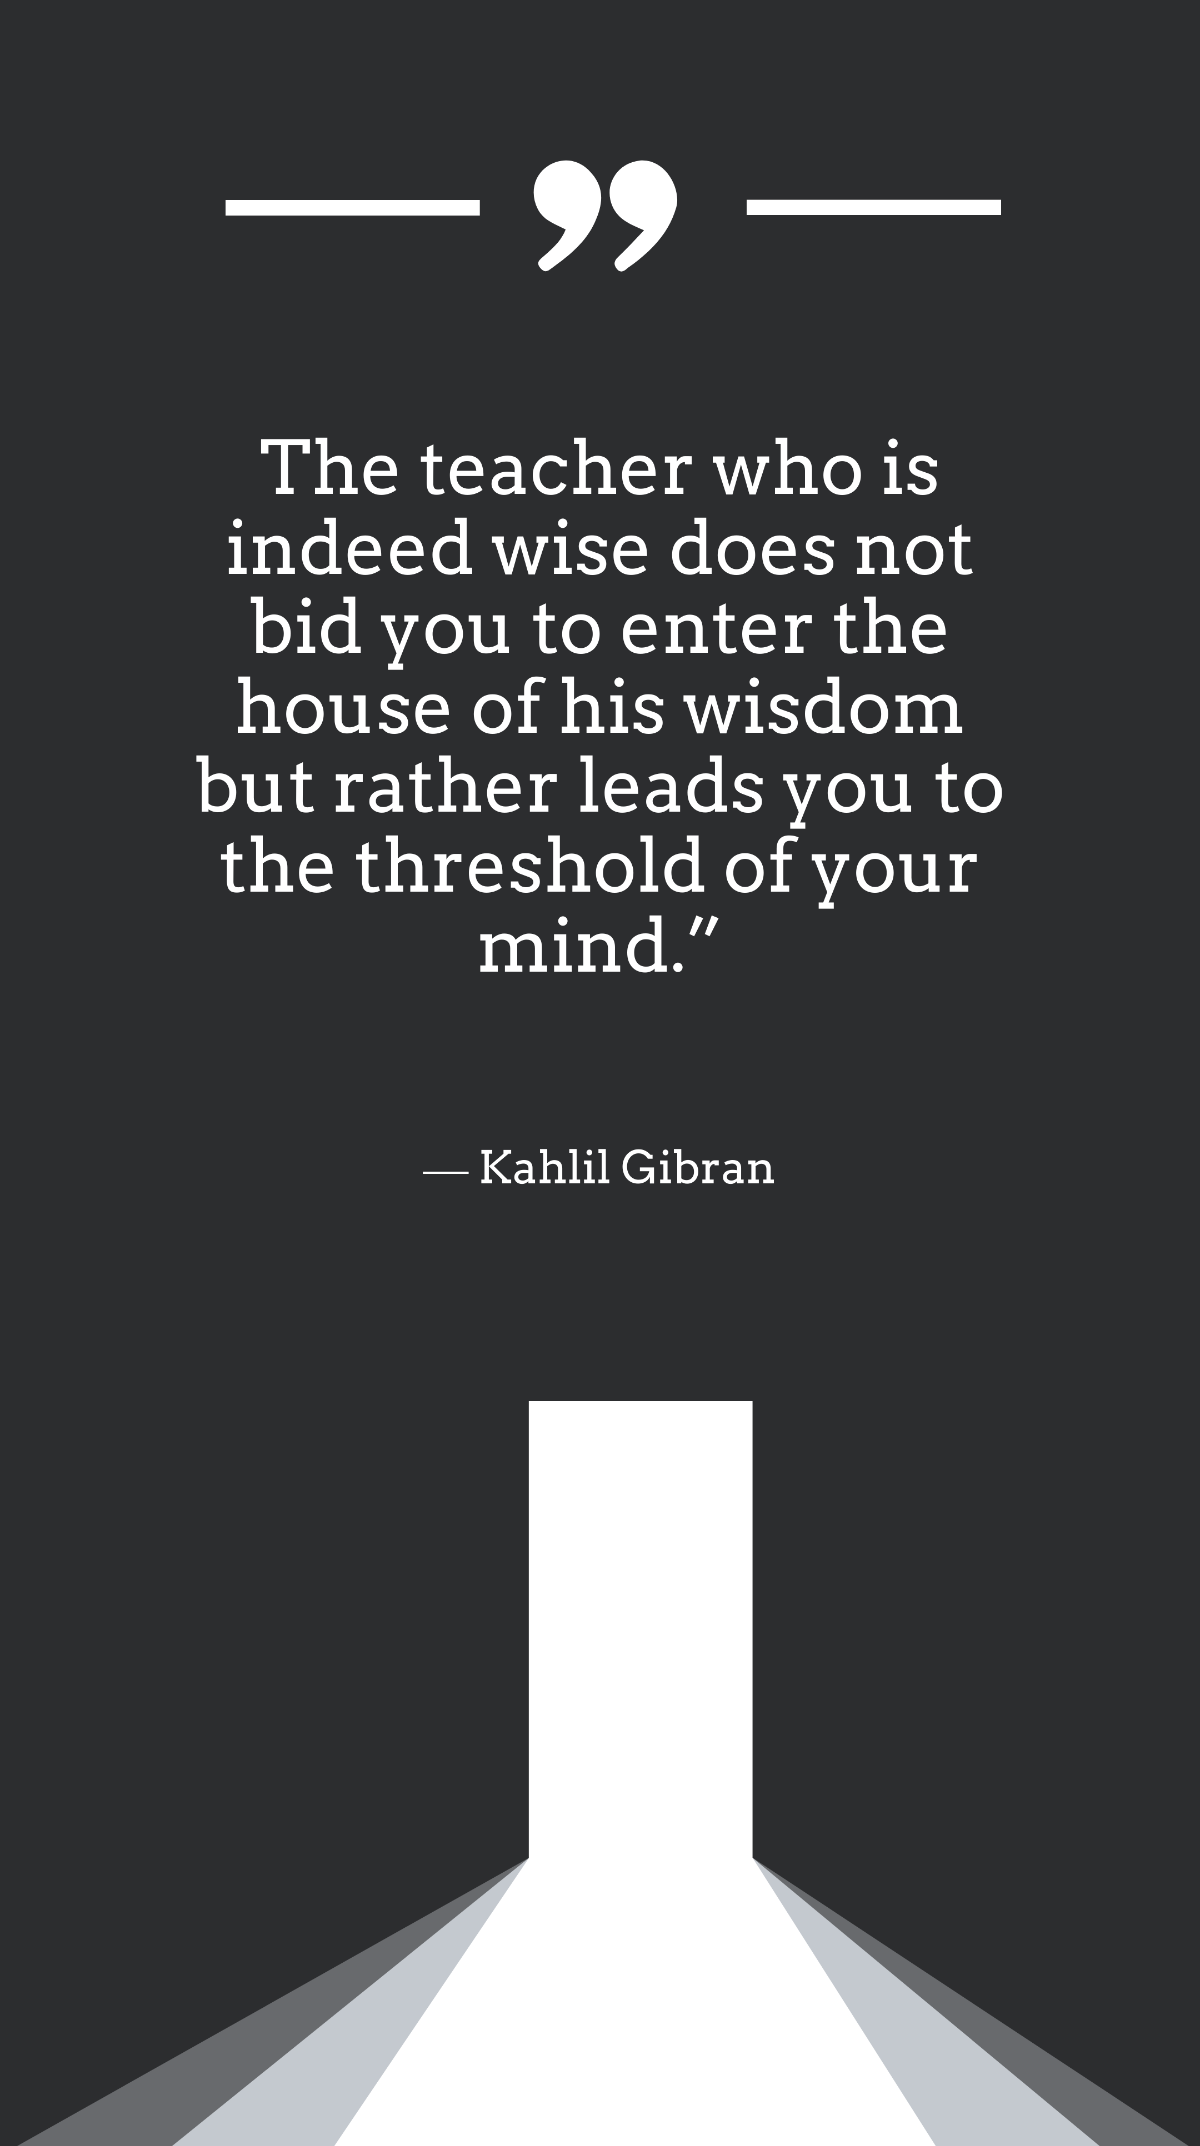 Kahlil Gibran - The teacher who is indeed wise does not bid you to enter the house of his wisdom but rather leads you to the threshold of your mind. Template